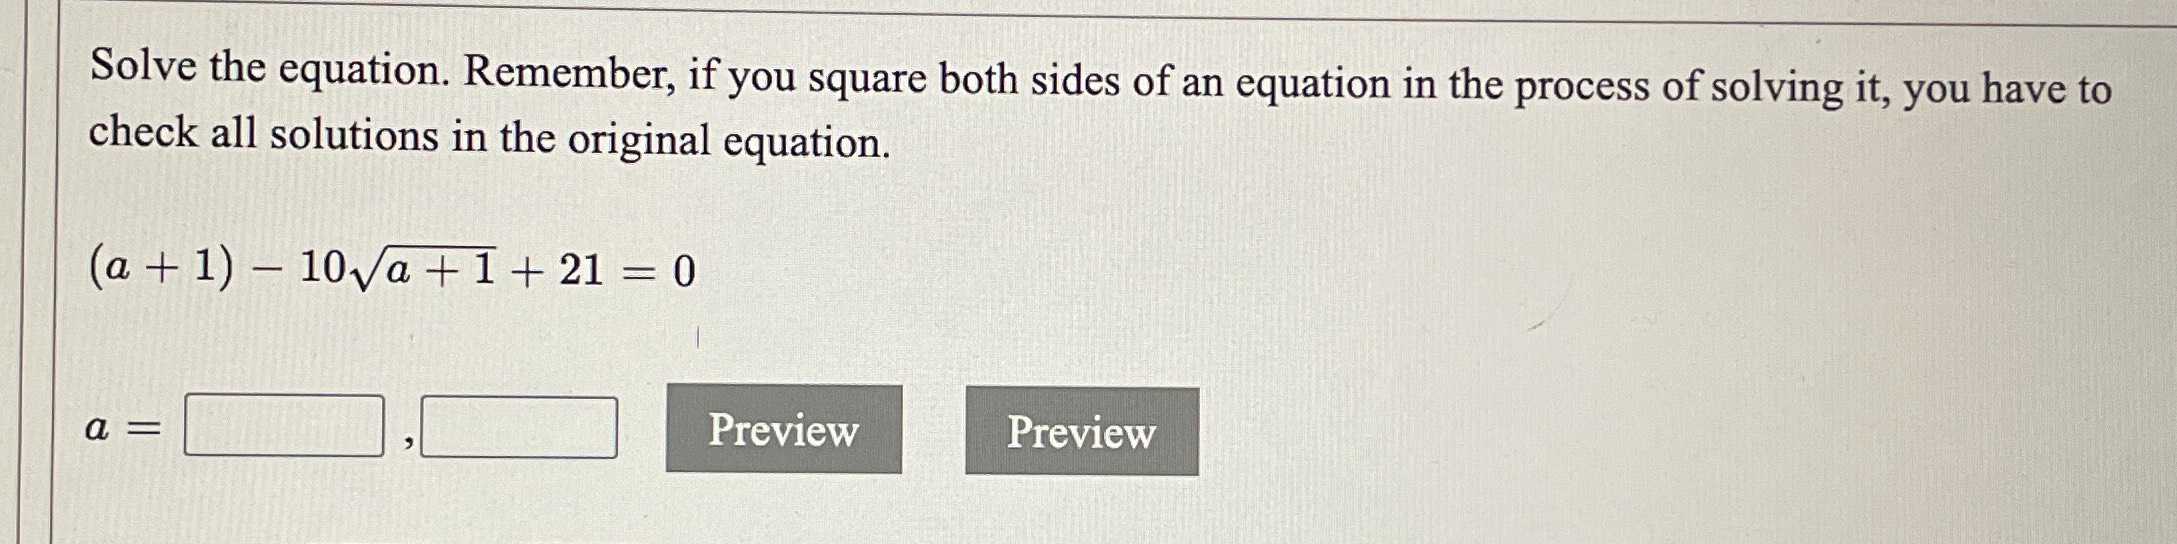 Solve the equation. Remember, if you square both s...